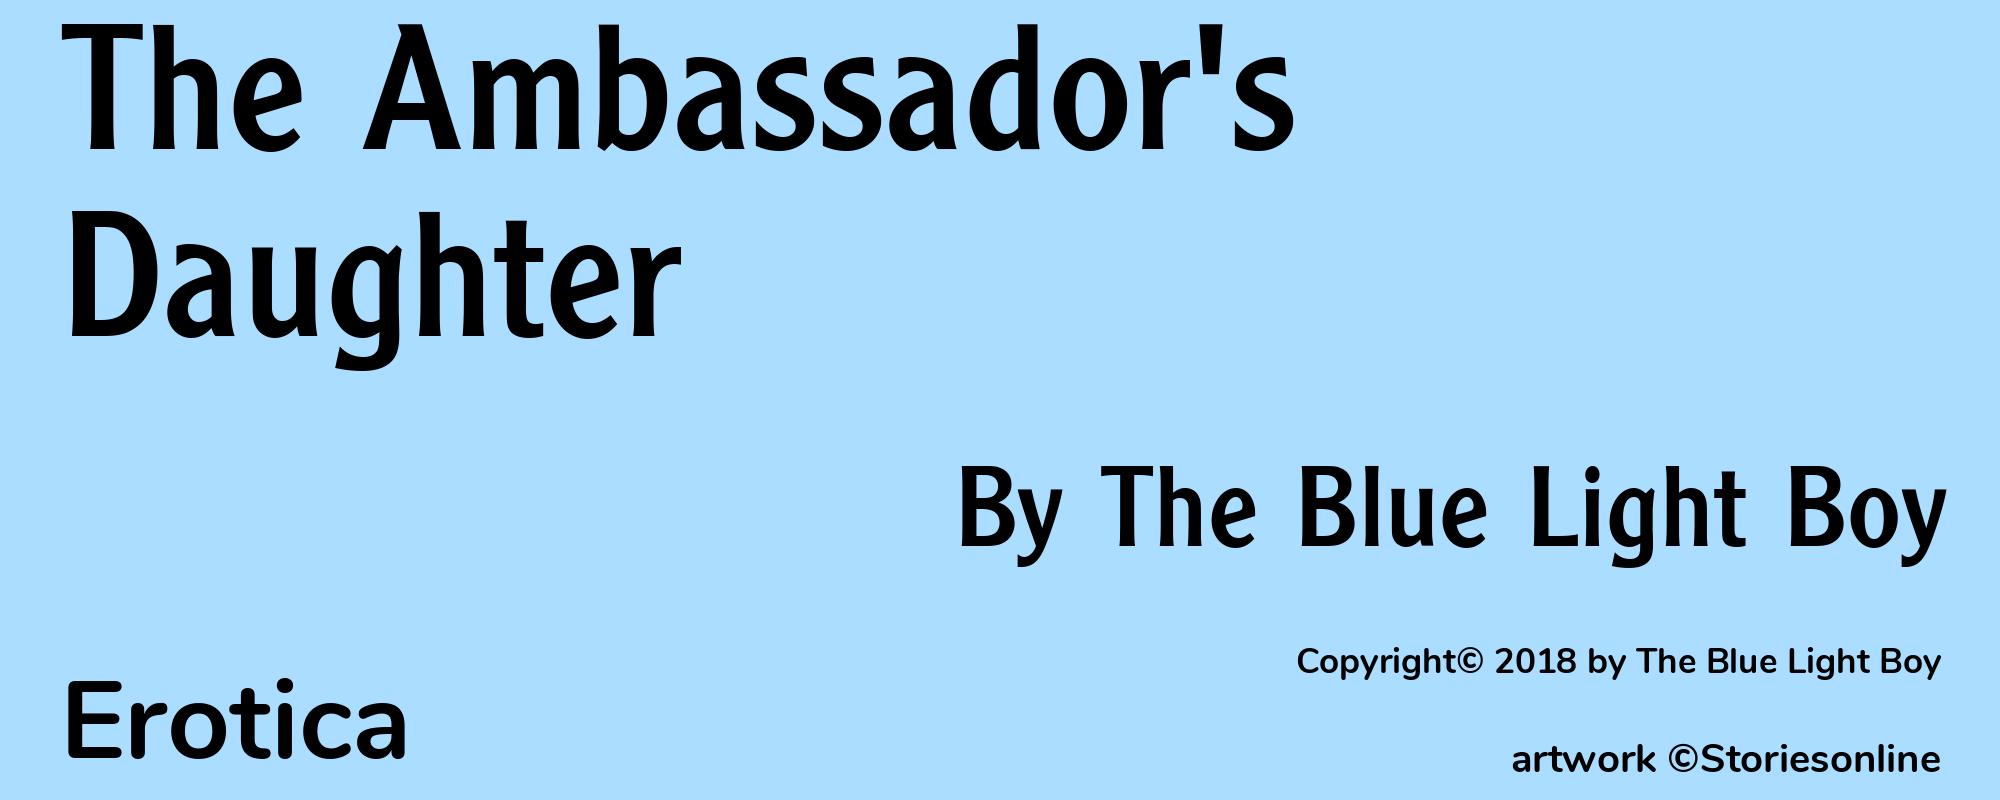 The Ambassador's Daughter - Cover